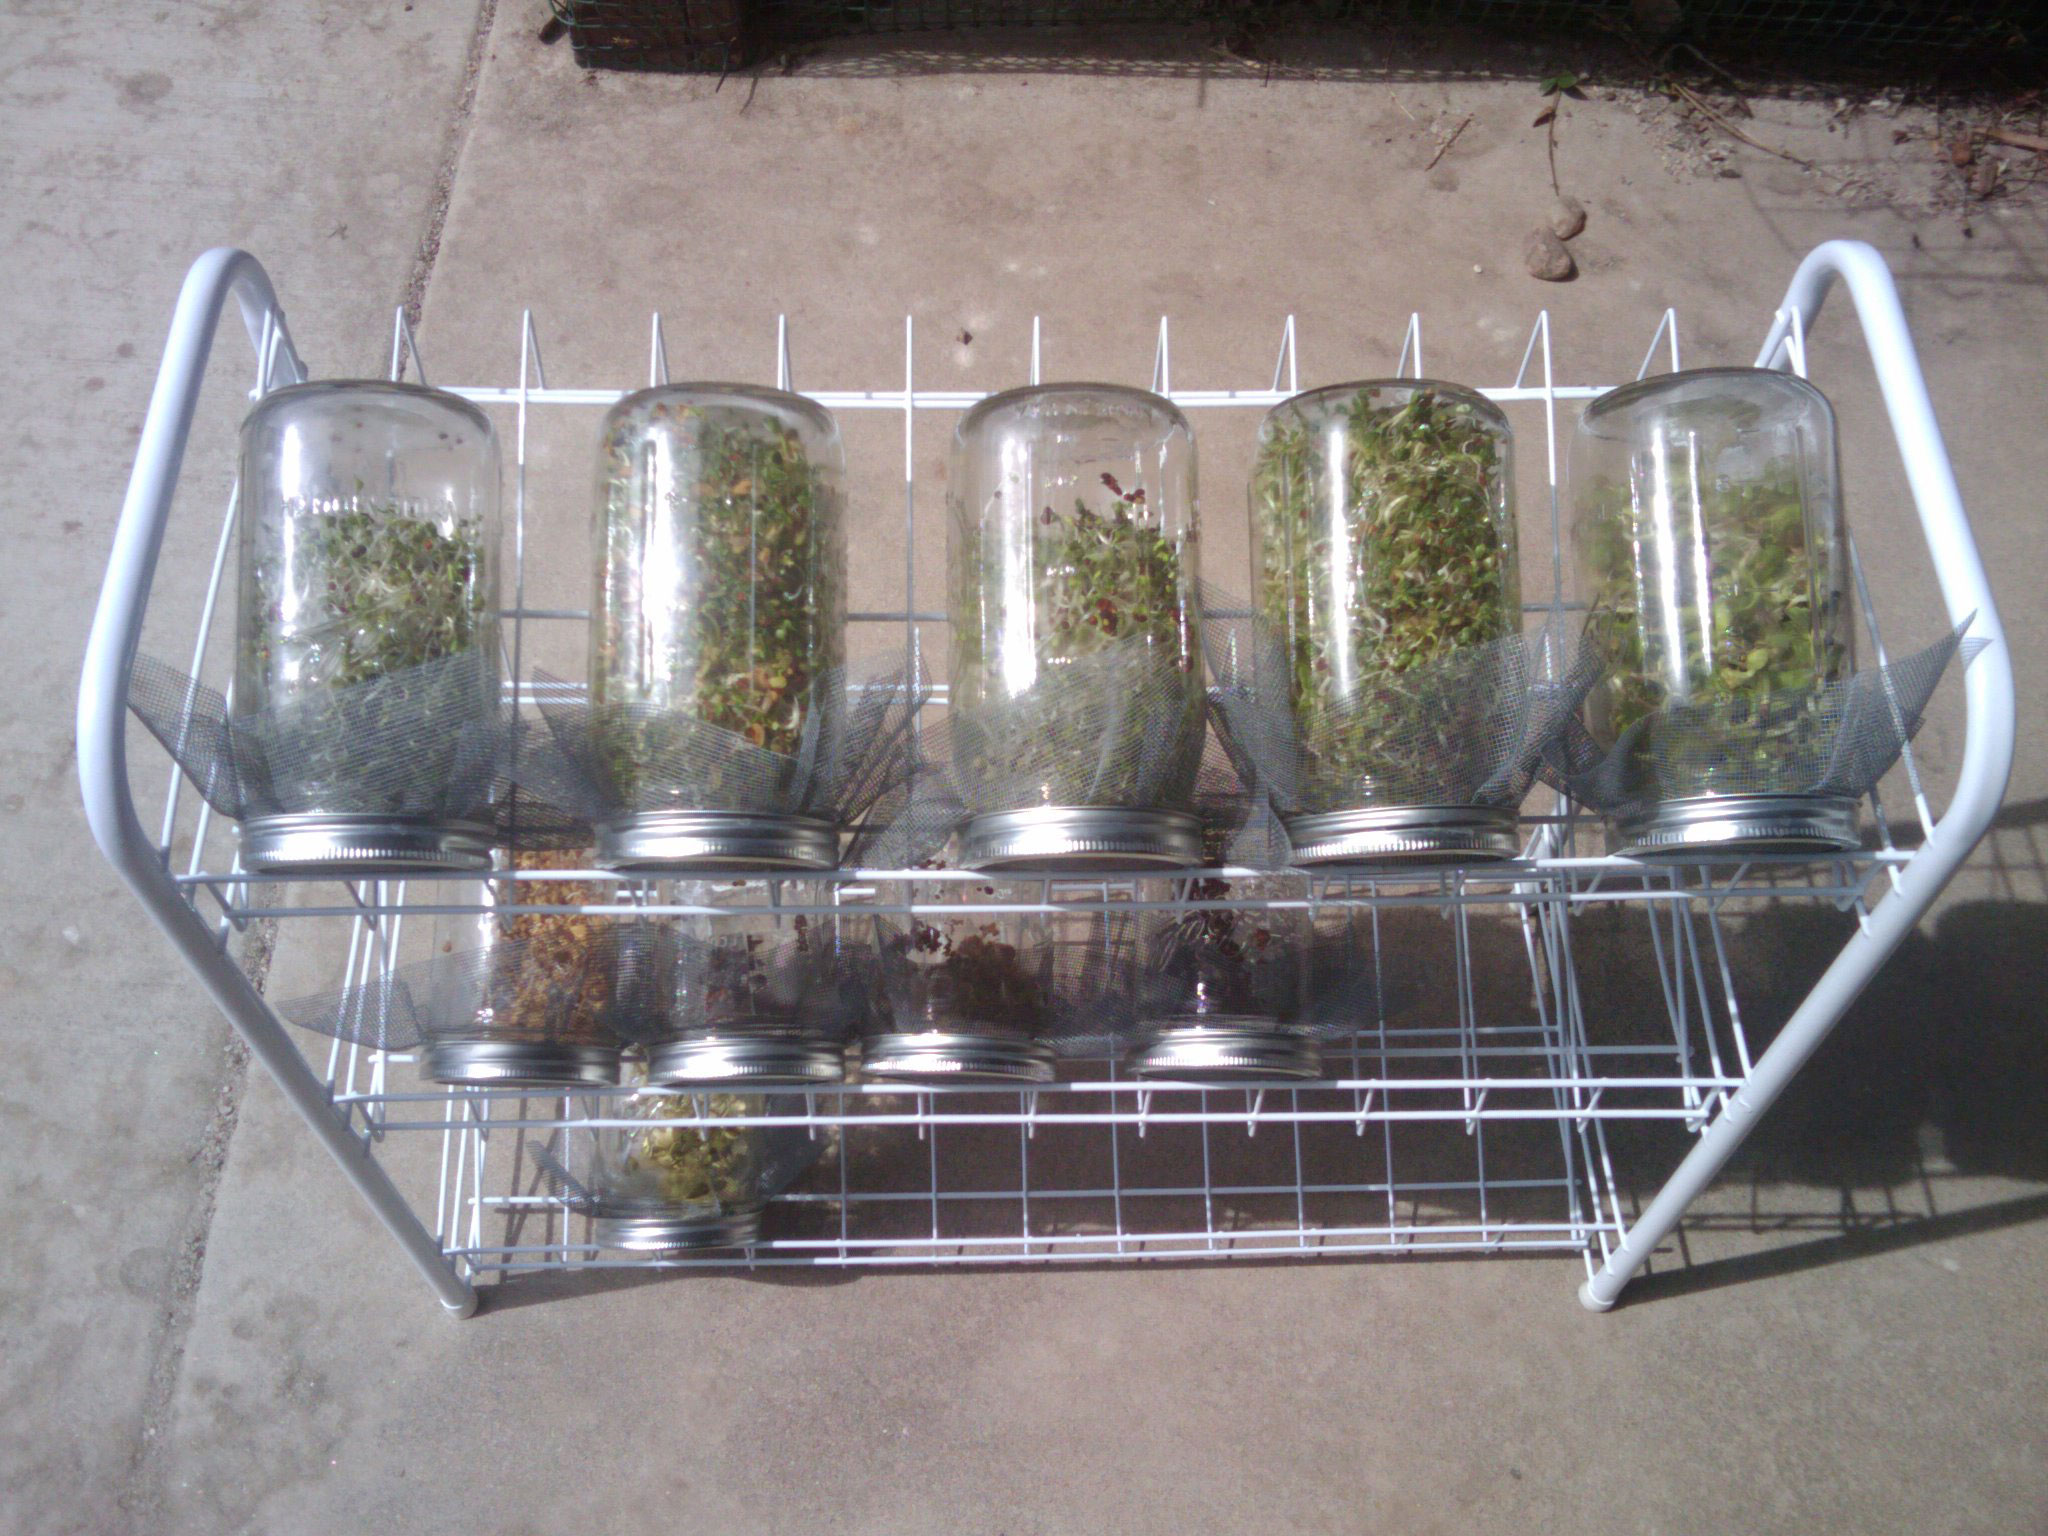 Shoe rack to hold the sprouting jars